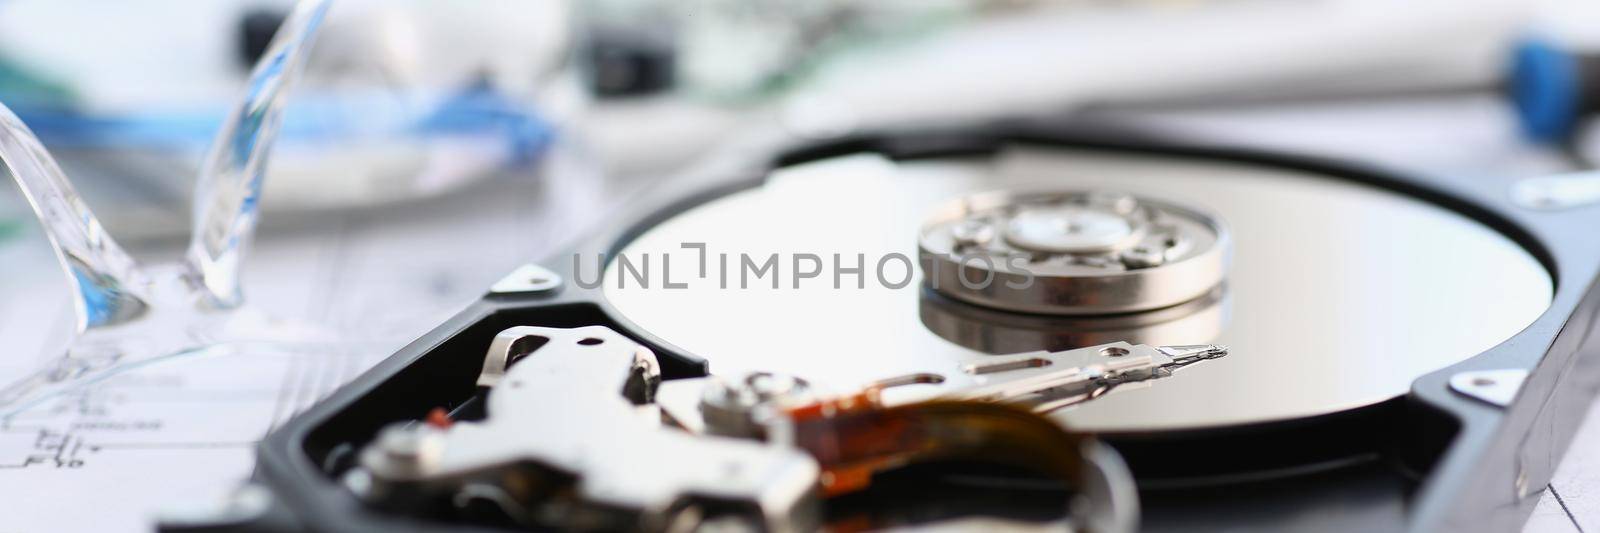 Close-up of disassembled hard drive from pc hdd and reader arm, made of plastic and metal. Magnetic disc and electronic part inside. Technology concept